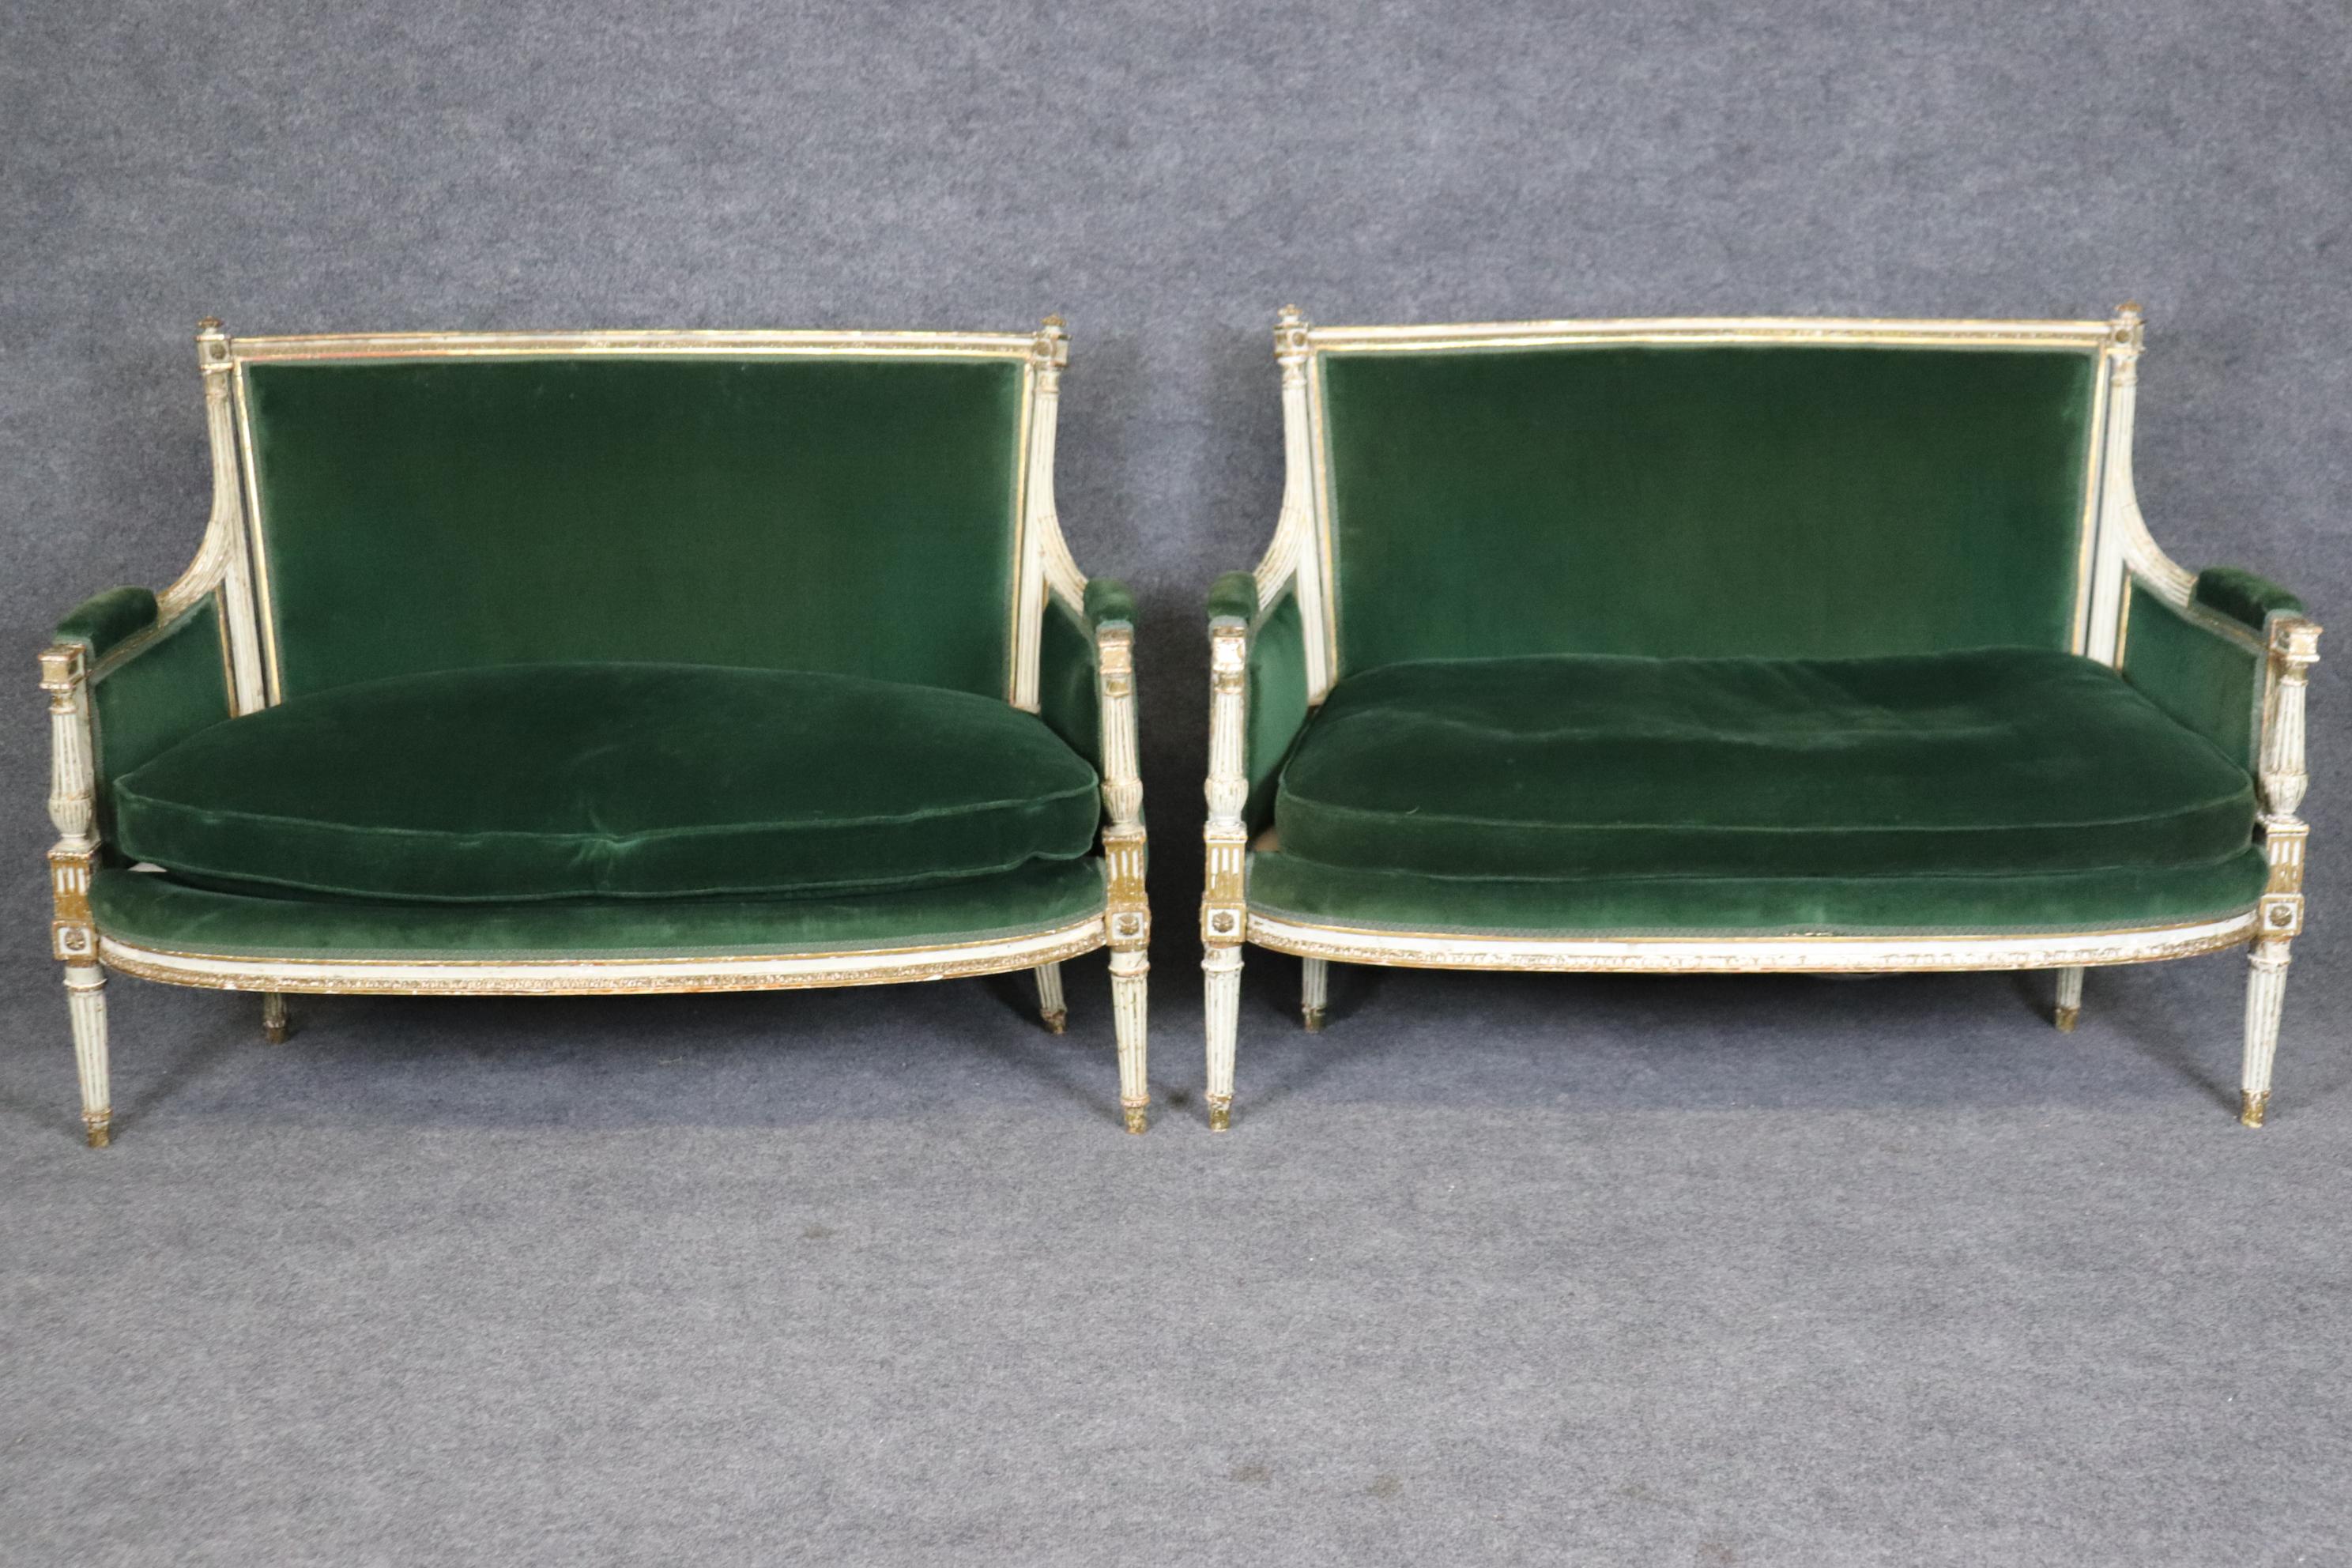 This is a very rare paid of lovingly distressed white and gold leaf decorated settees or canapes with gorgeous deep green velvet upholstery in good used condition. The frames are authentically distressed from being cleaned and polished over 120